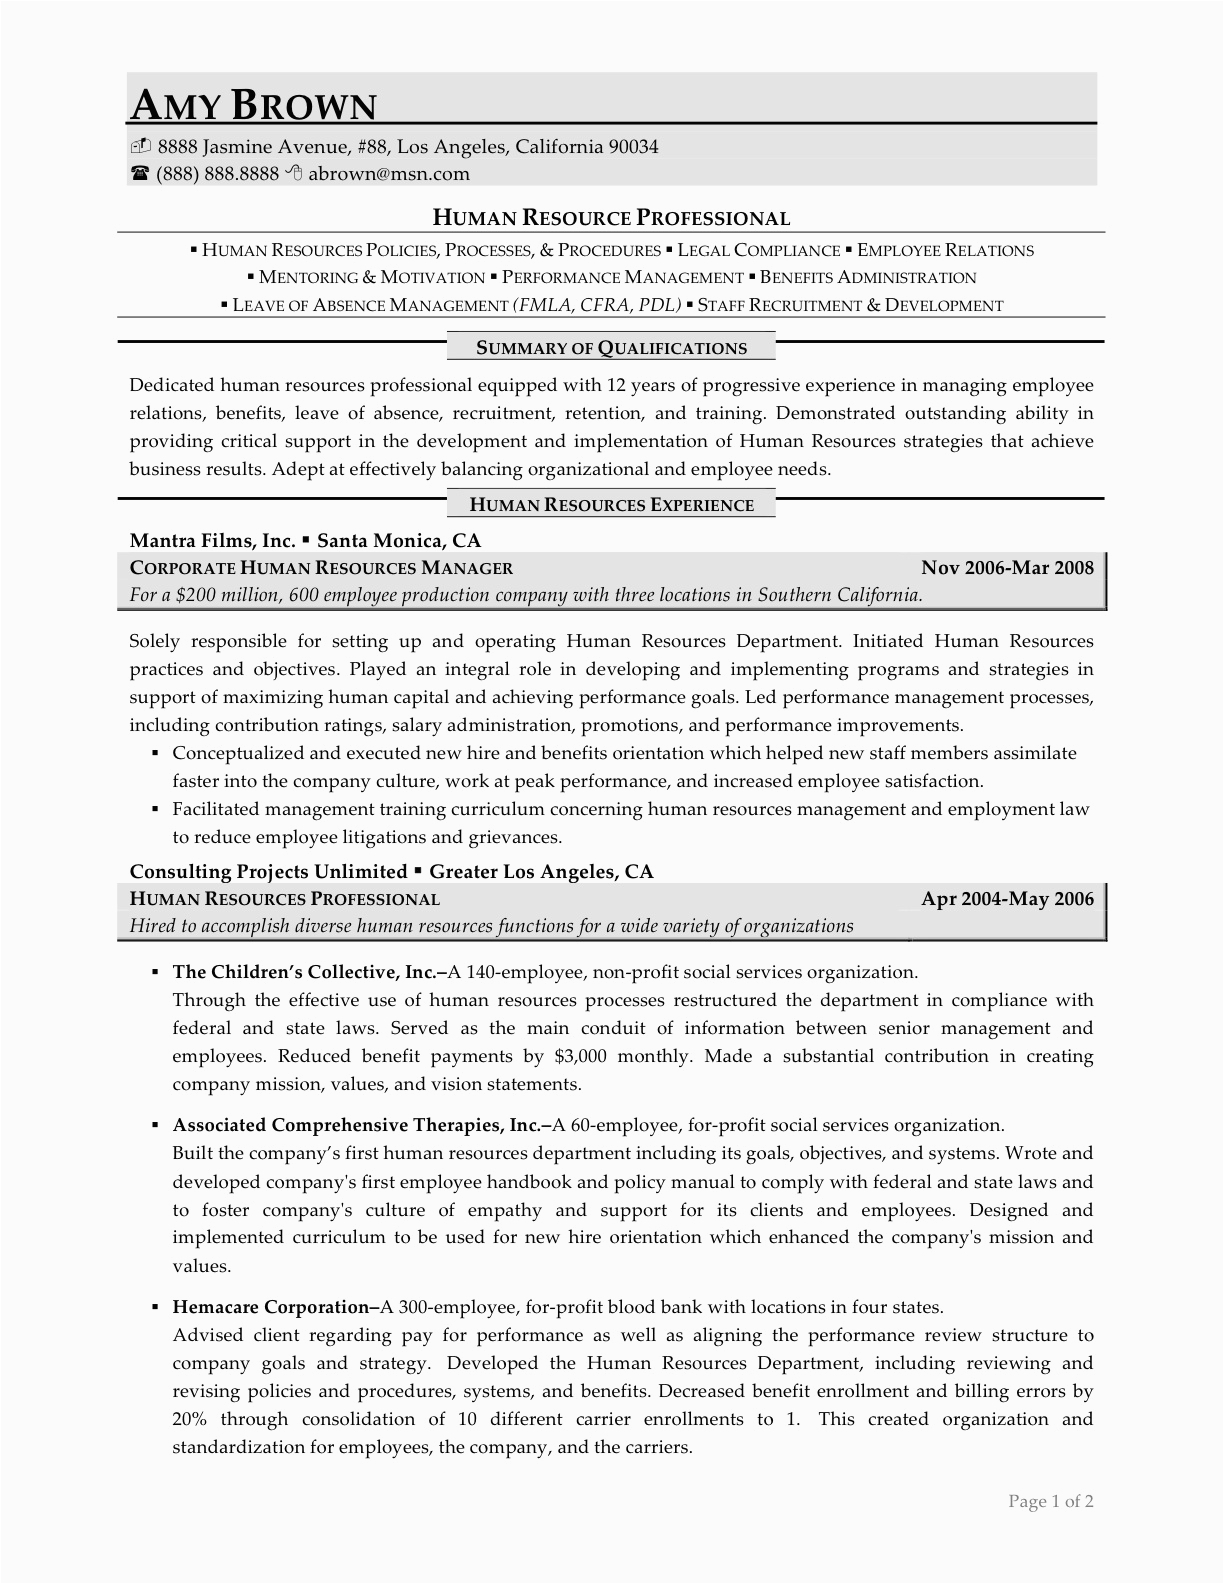 Human Resources Summary Of Qualifications Resume Sample Human Resources Resume Examples Resume Professional Writers